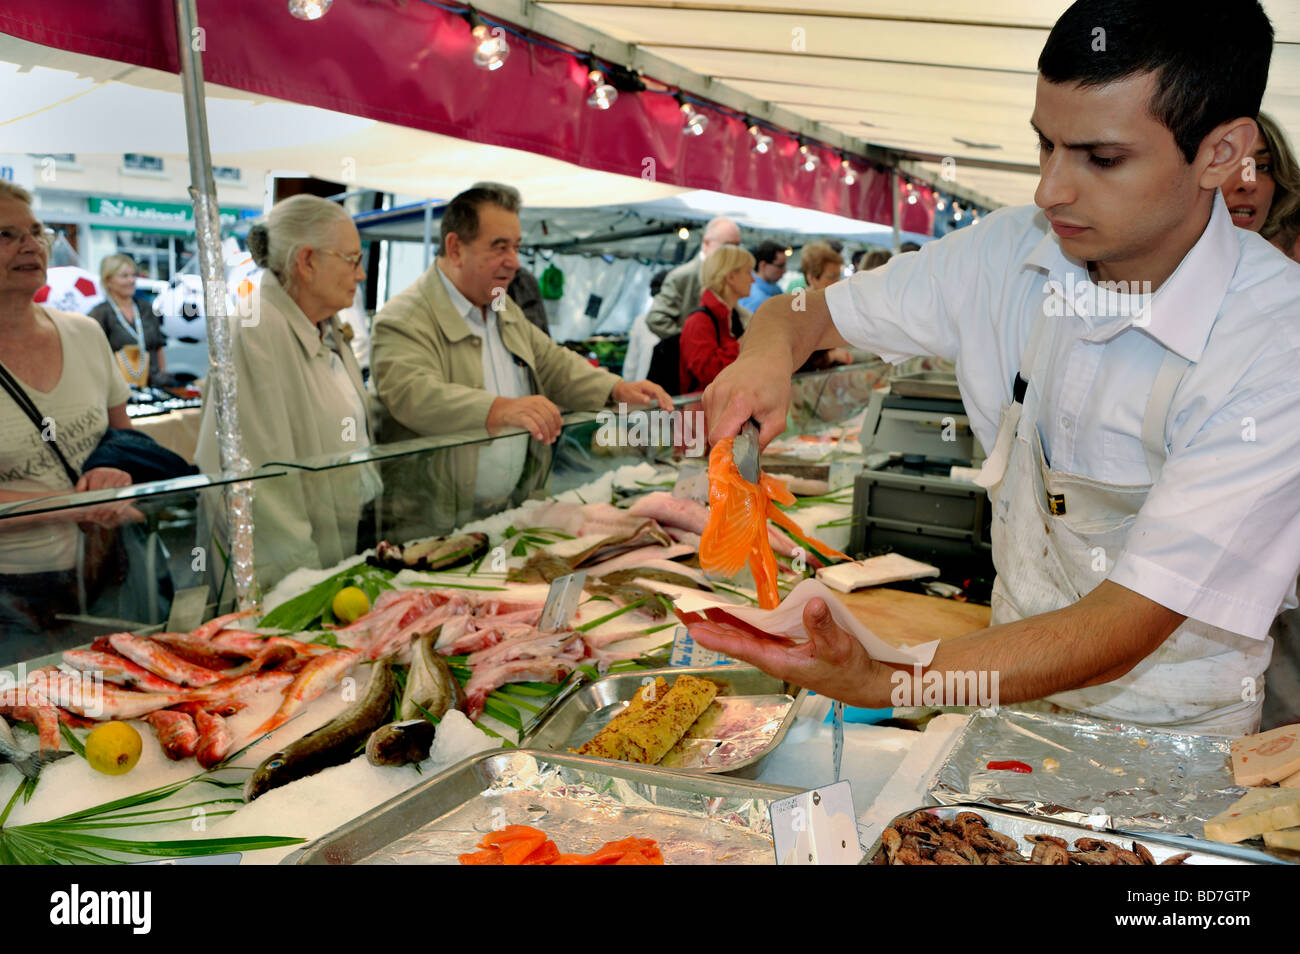 Paris France, People Shopping in Outside Public Food Market, Stall, Display, Fresh Fish  Young Male Clerk Serving Salmon, Street Stock Photo